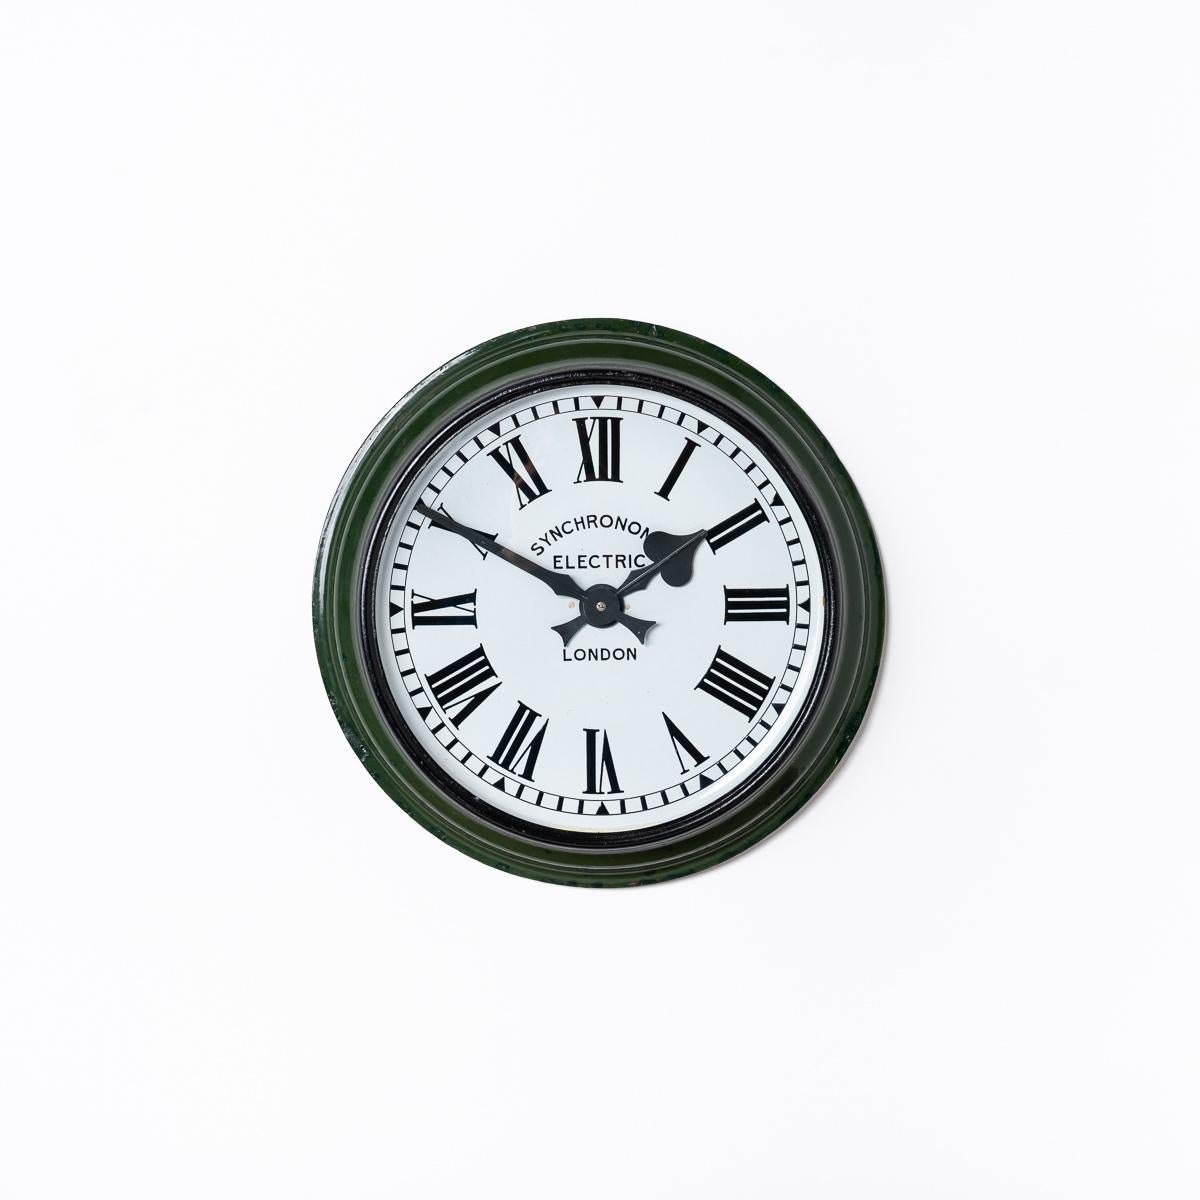 Introducing the Beautiful Original Railway Clock by Synchronome - a vintage masterpiece that embodies the best of British clock-making. Crafted in England circa 1920 by The Synchronome Company Ltd, this clock exemplifies the brand's dedication to